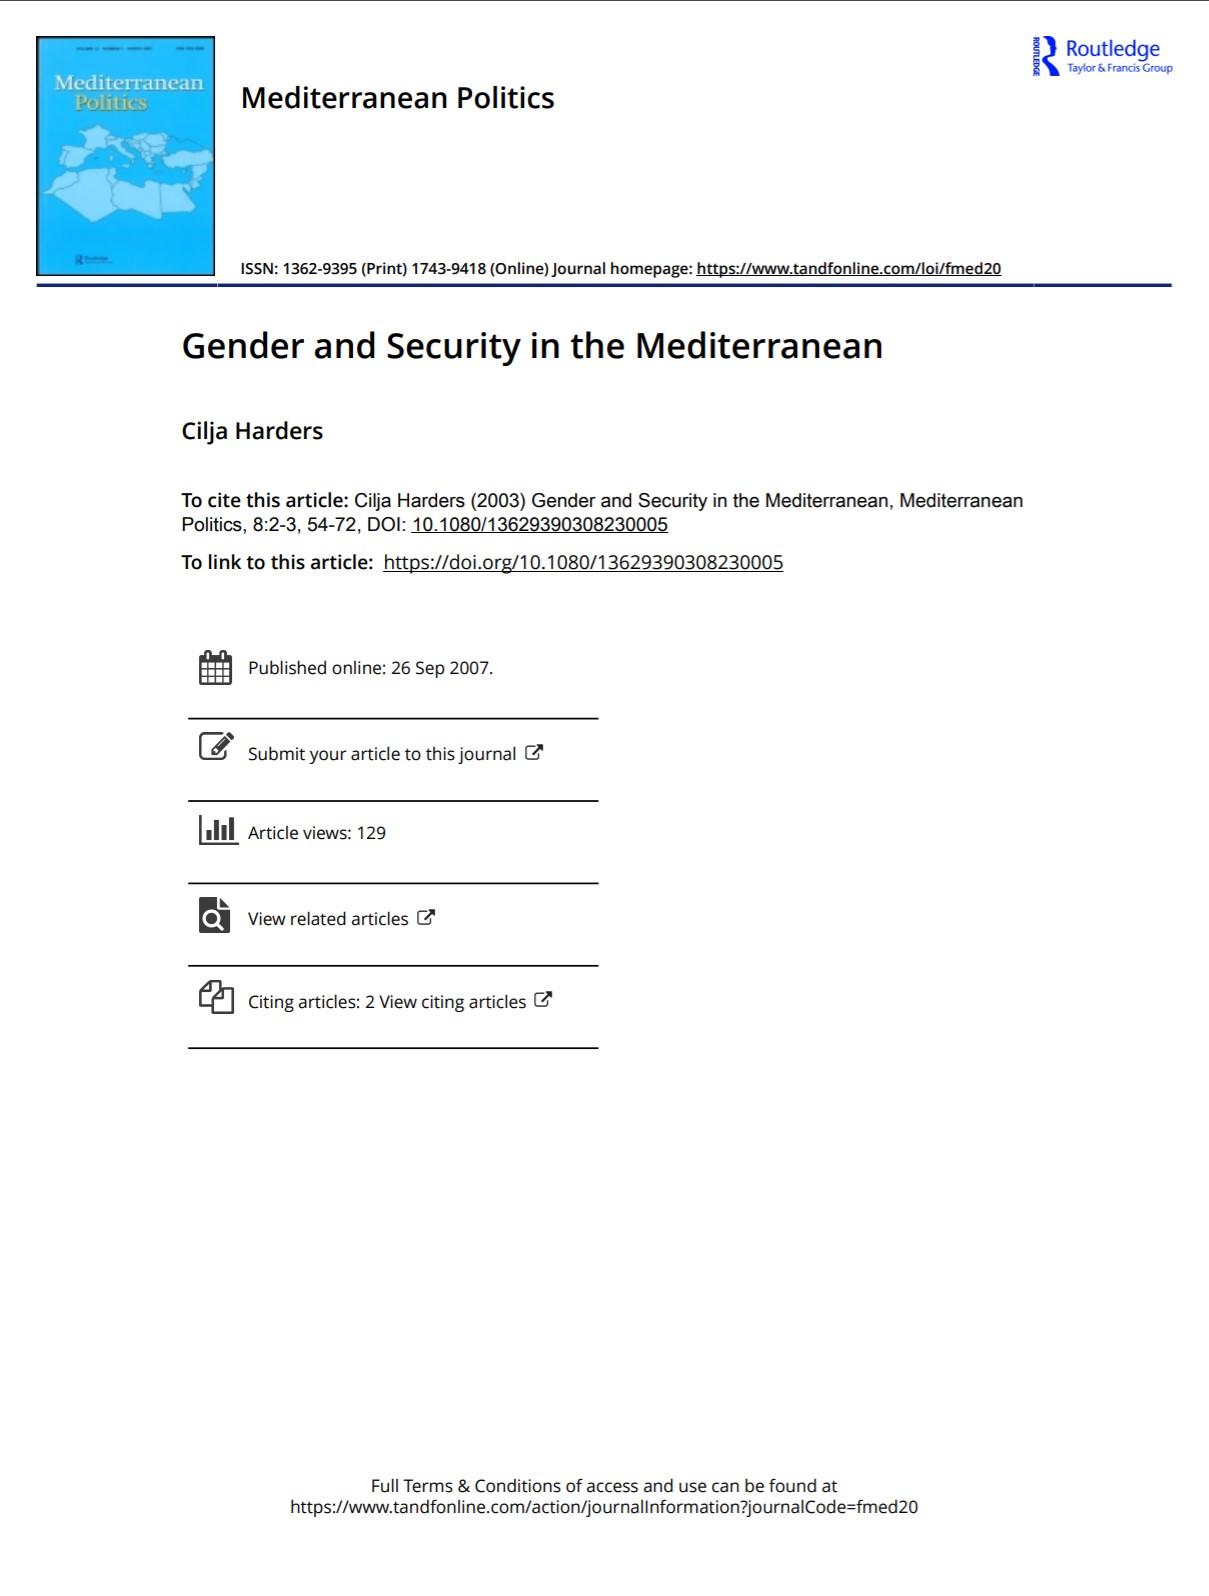 Gender and Security in the Mediterranean